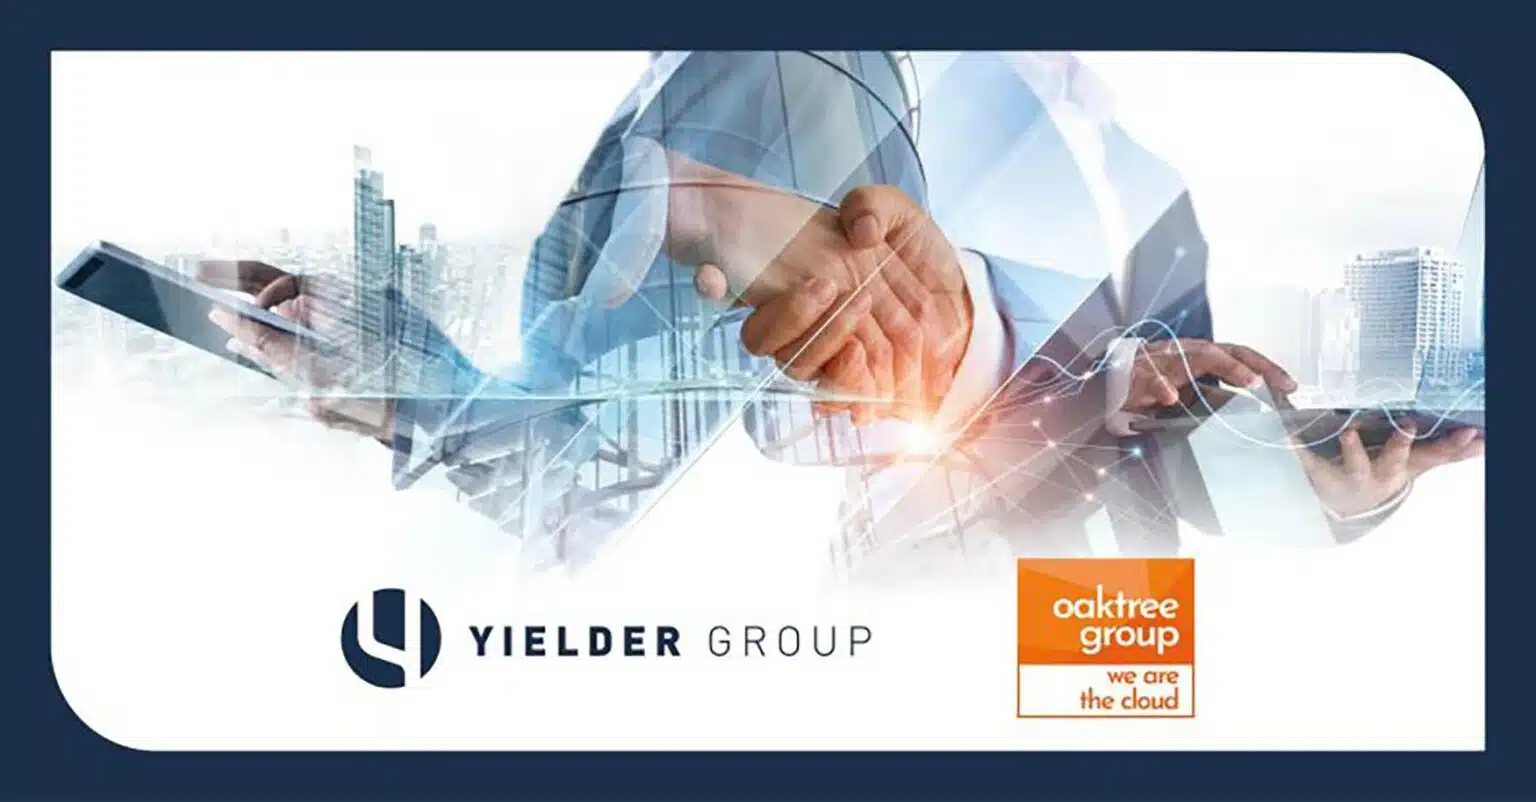 Yielder Group neemt Oaktree Group over